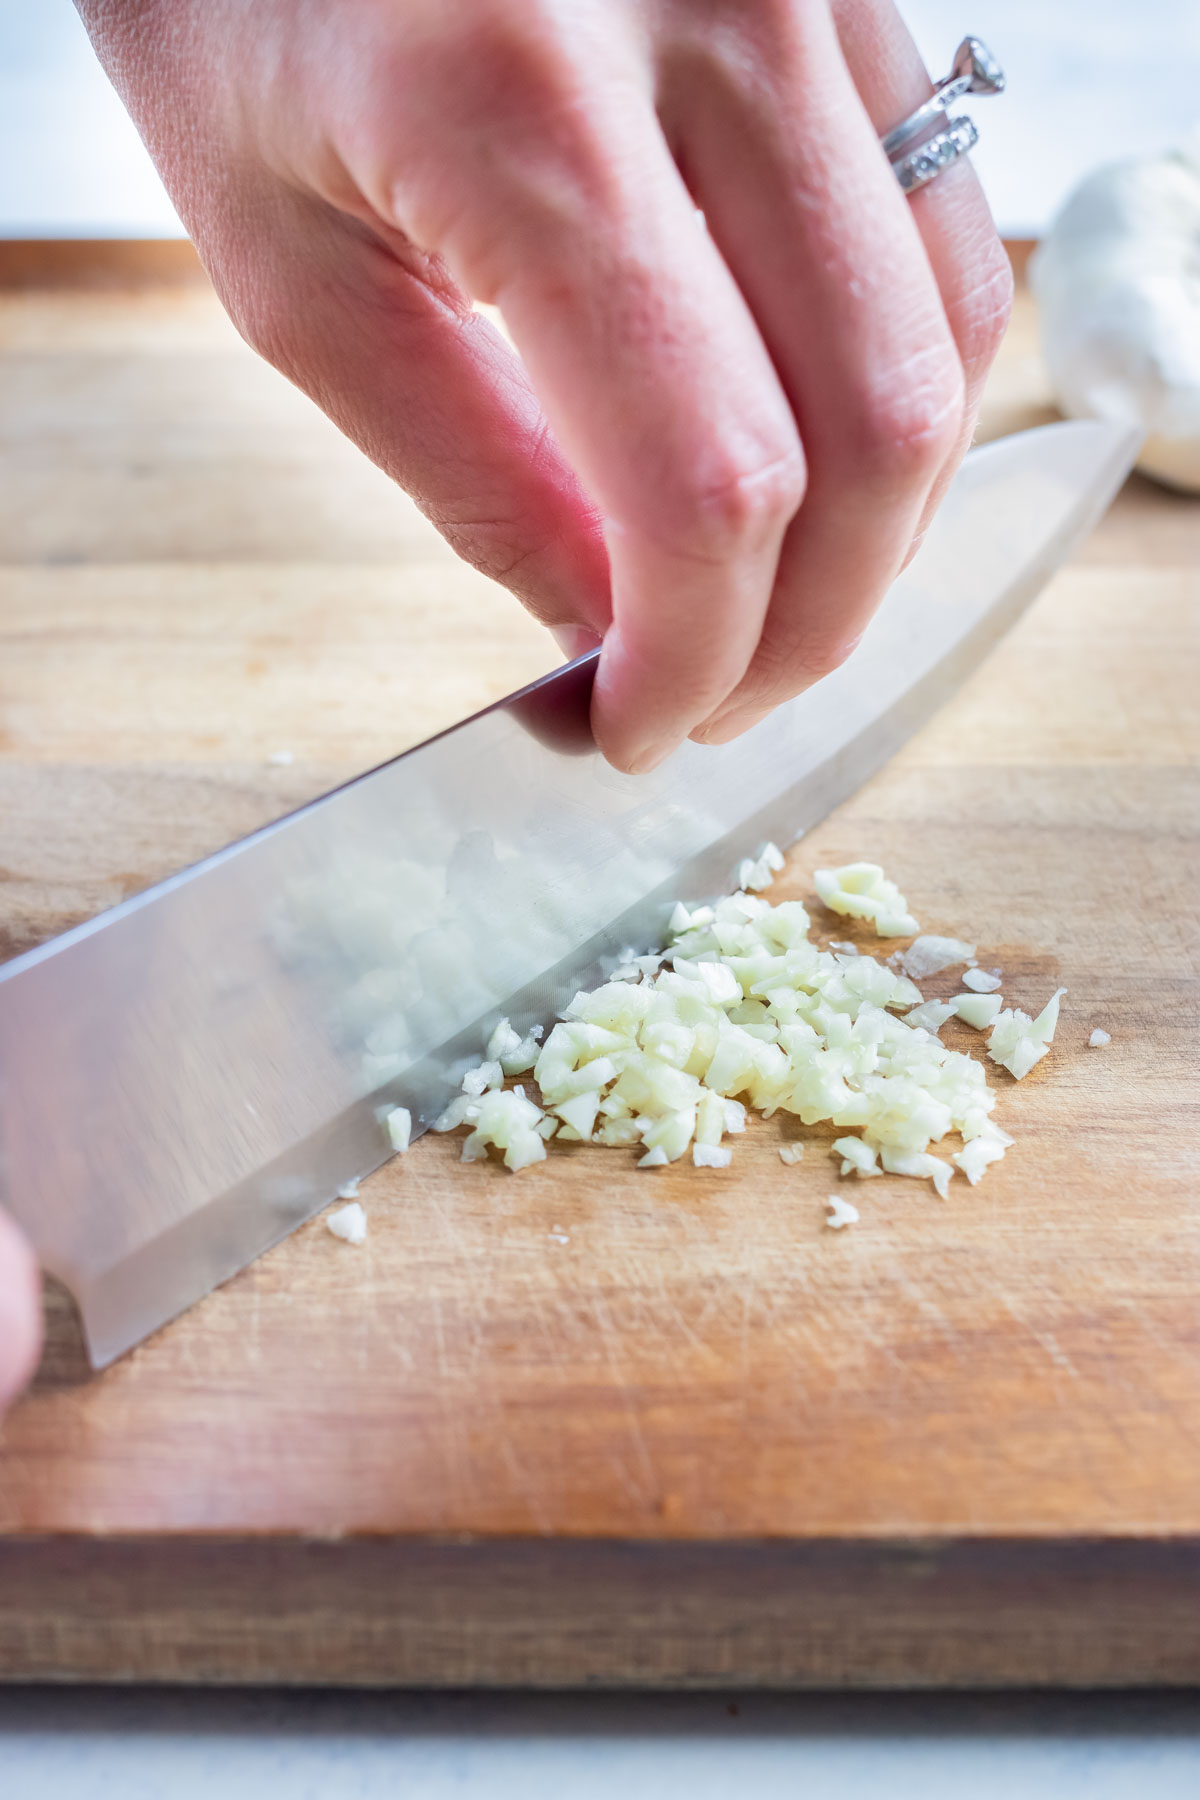 The garlic clove is then finely chopped with a chefs knife.